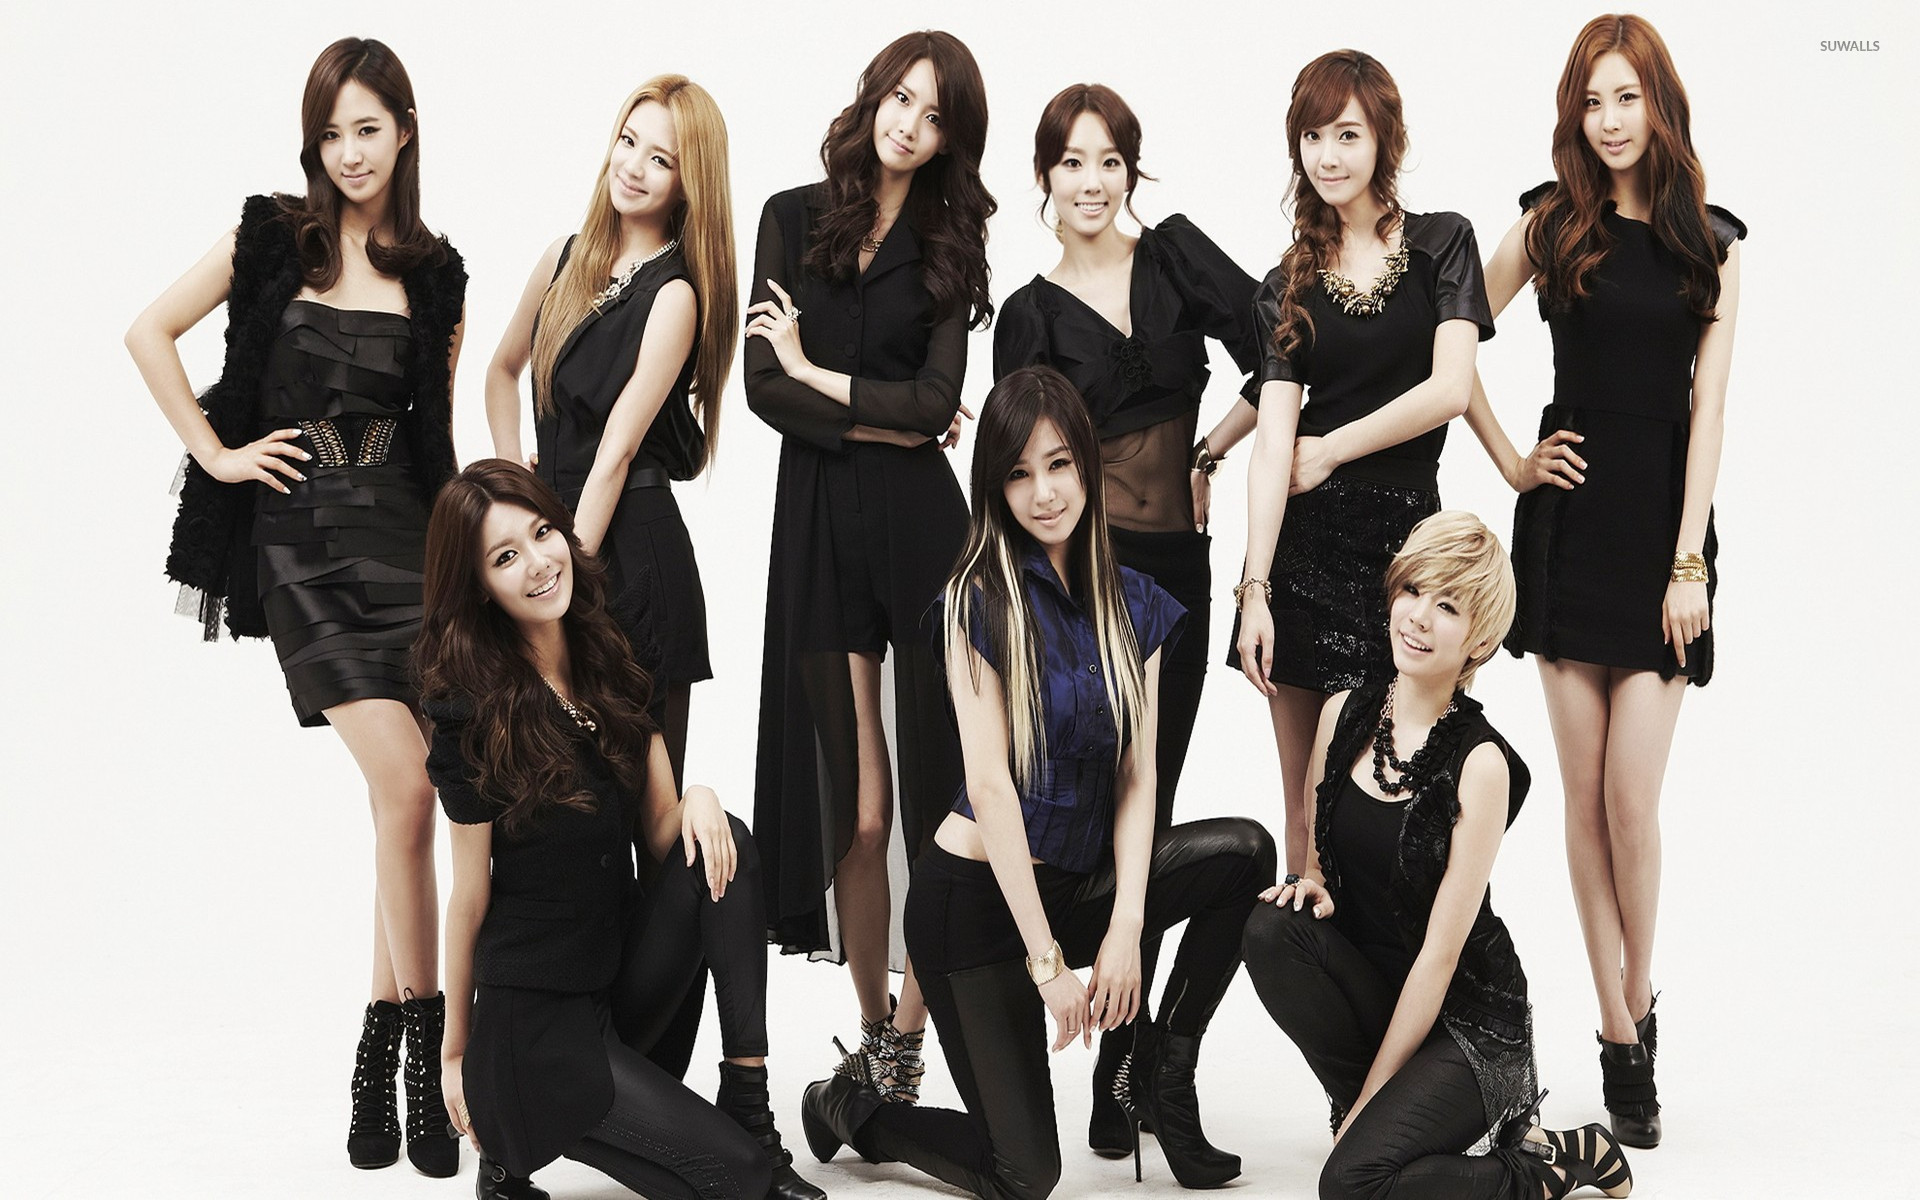 Girls Generation 10 Wallpaper Celebrity Wallpapers 20853 Images, Photos, Reviews